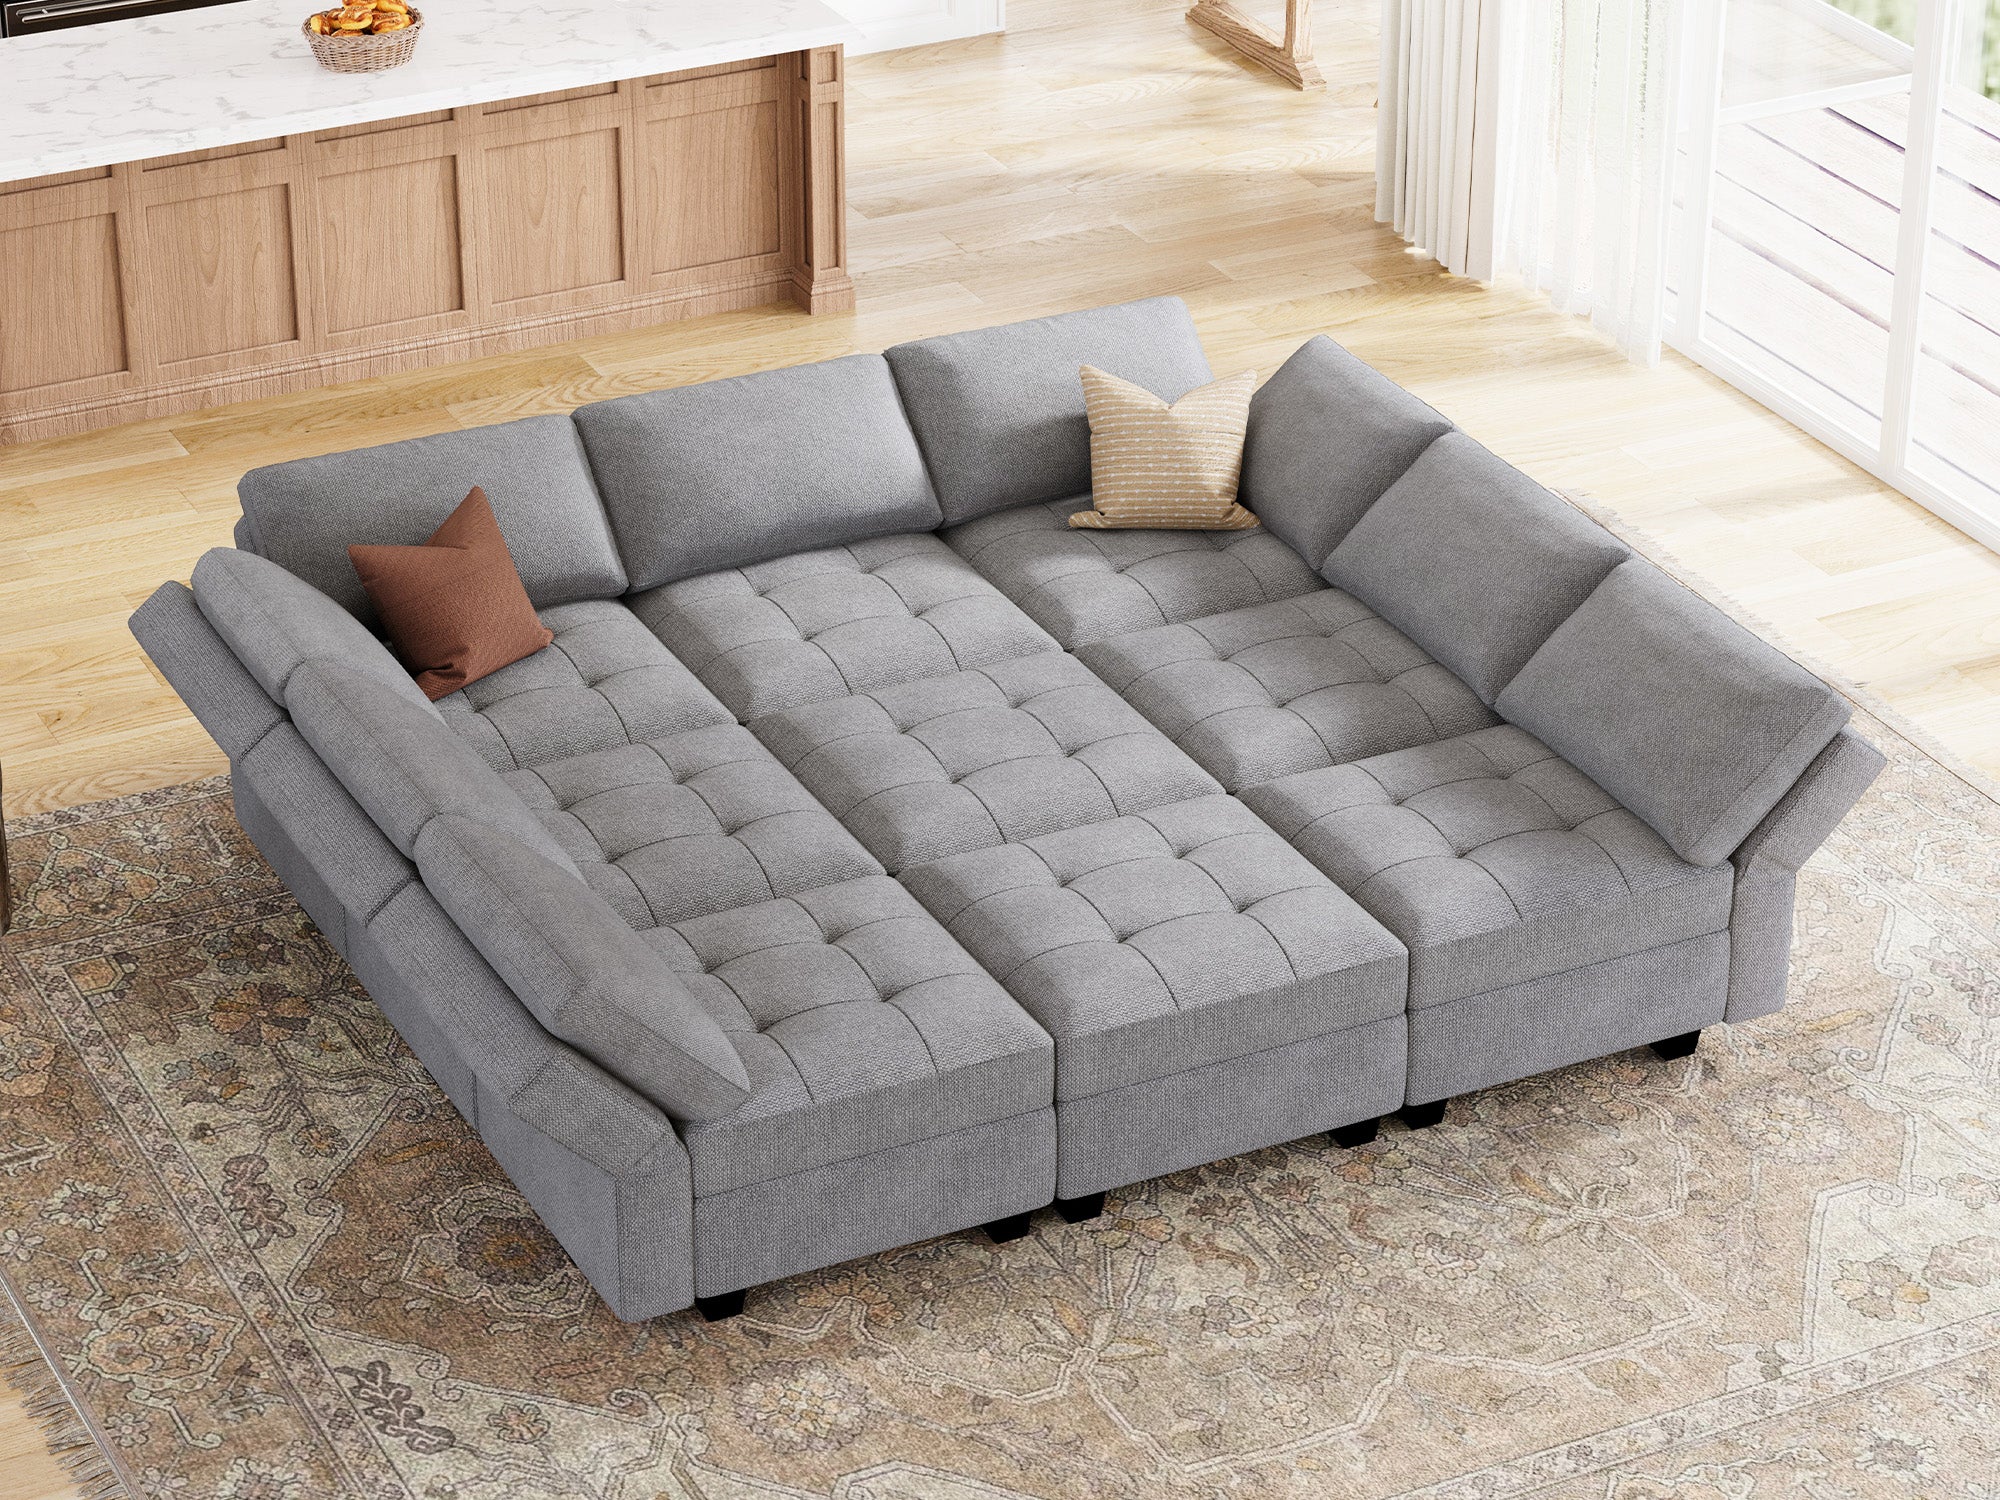 HONBAY 9-Piece Polyester Modular Sleeper Sectional Adjustable Sofa With Storage Seat